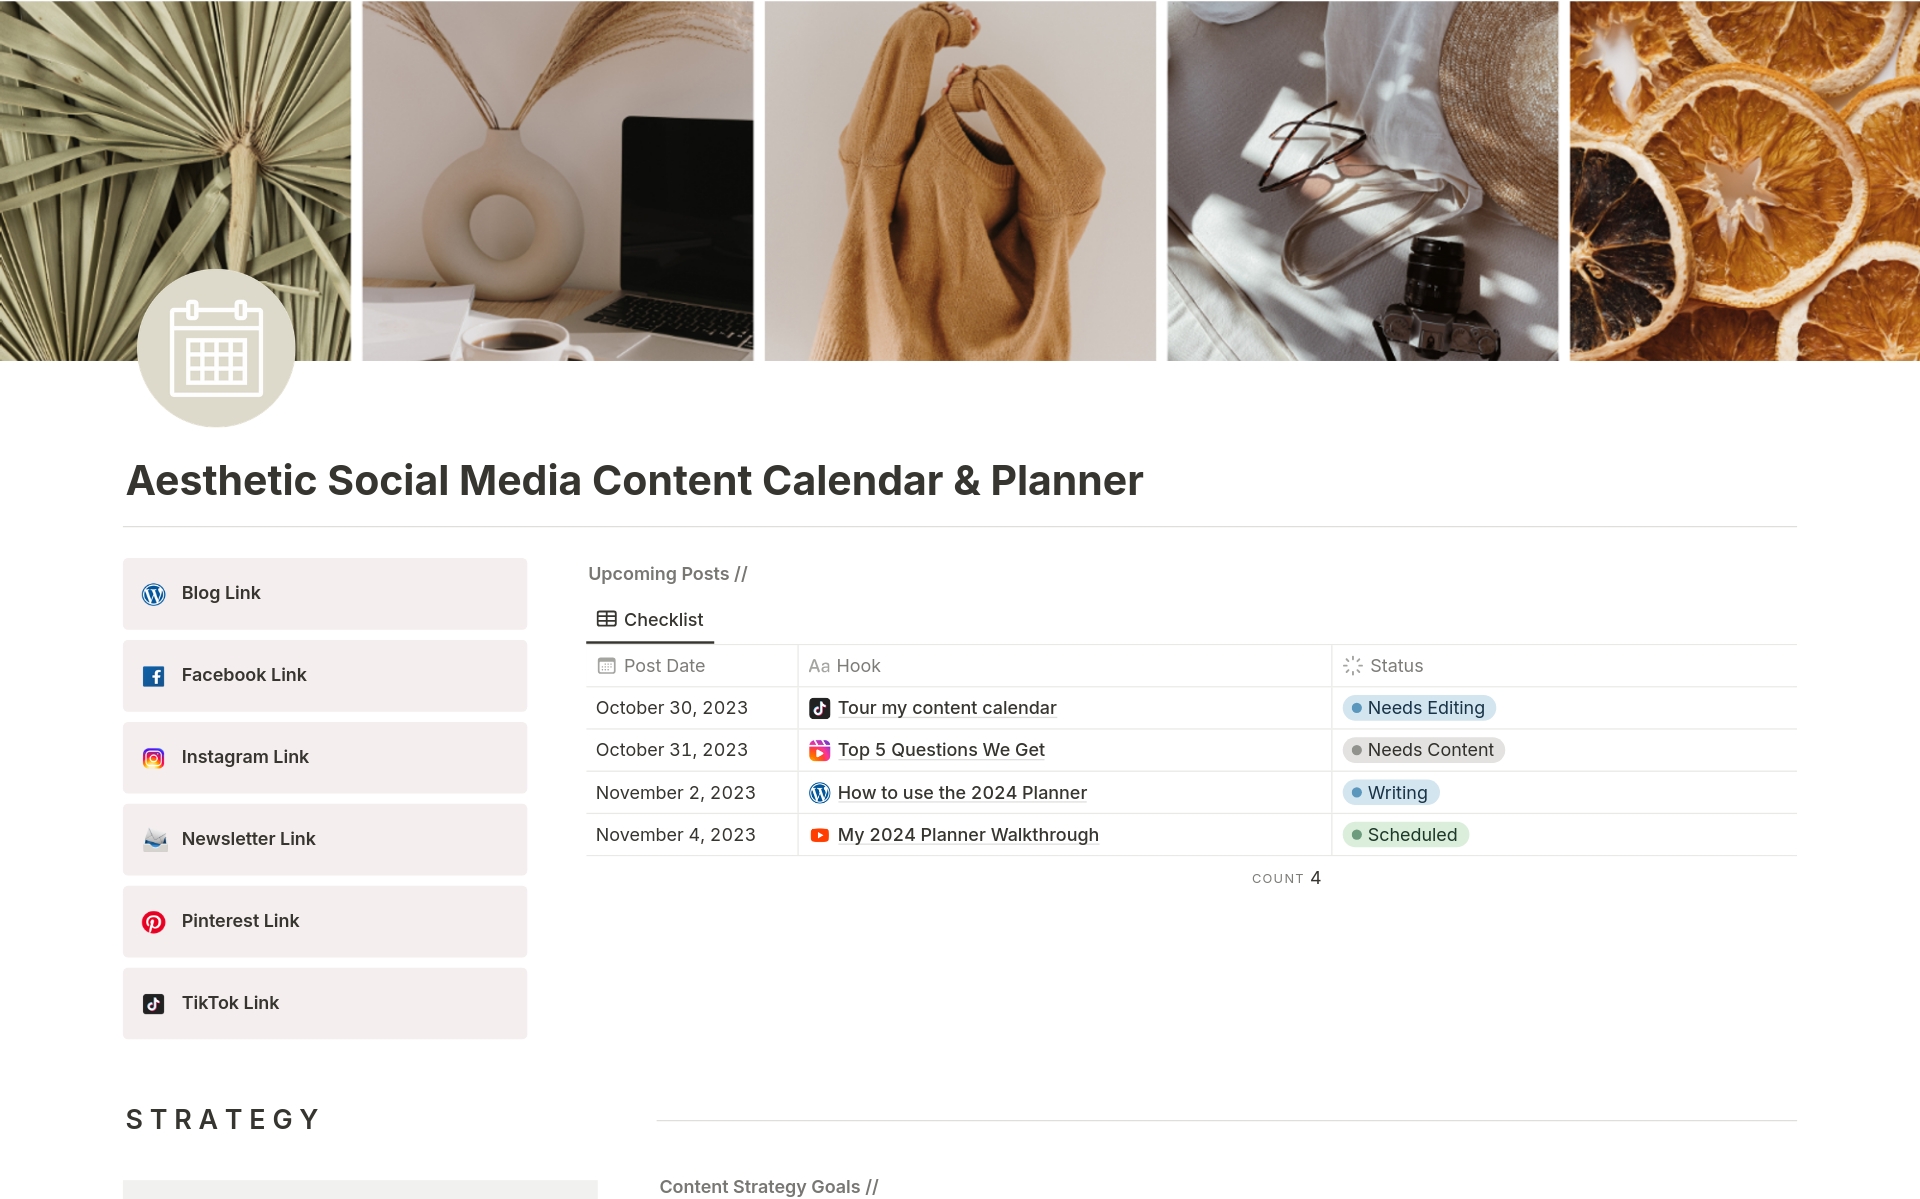 Transform your social media game with our innovative content calendar and planner. Define goals, plan seamlessly, and review performance effortlessly. Elevate your online presence today! 😊